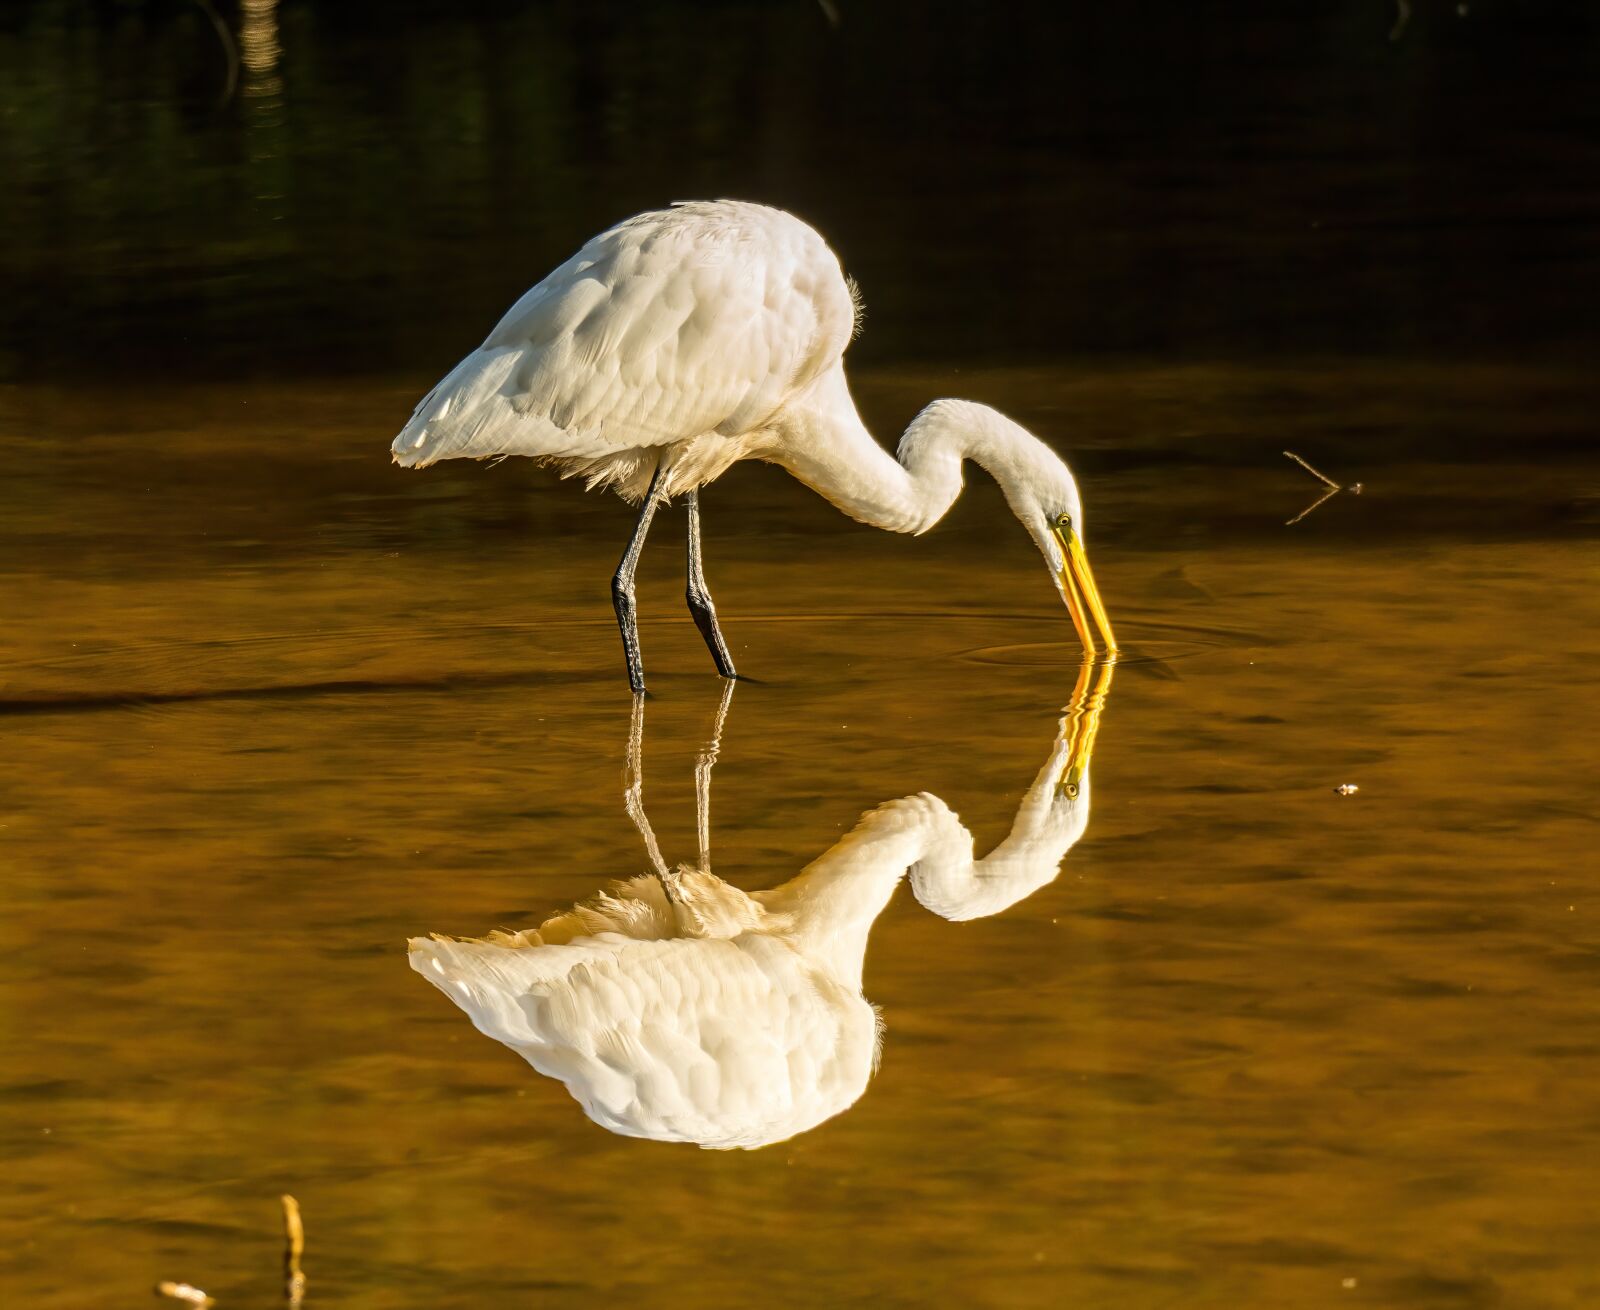 Sony a6400 sample photo. Egret reflection, egret looking photography